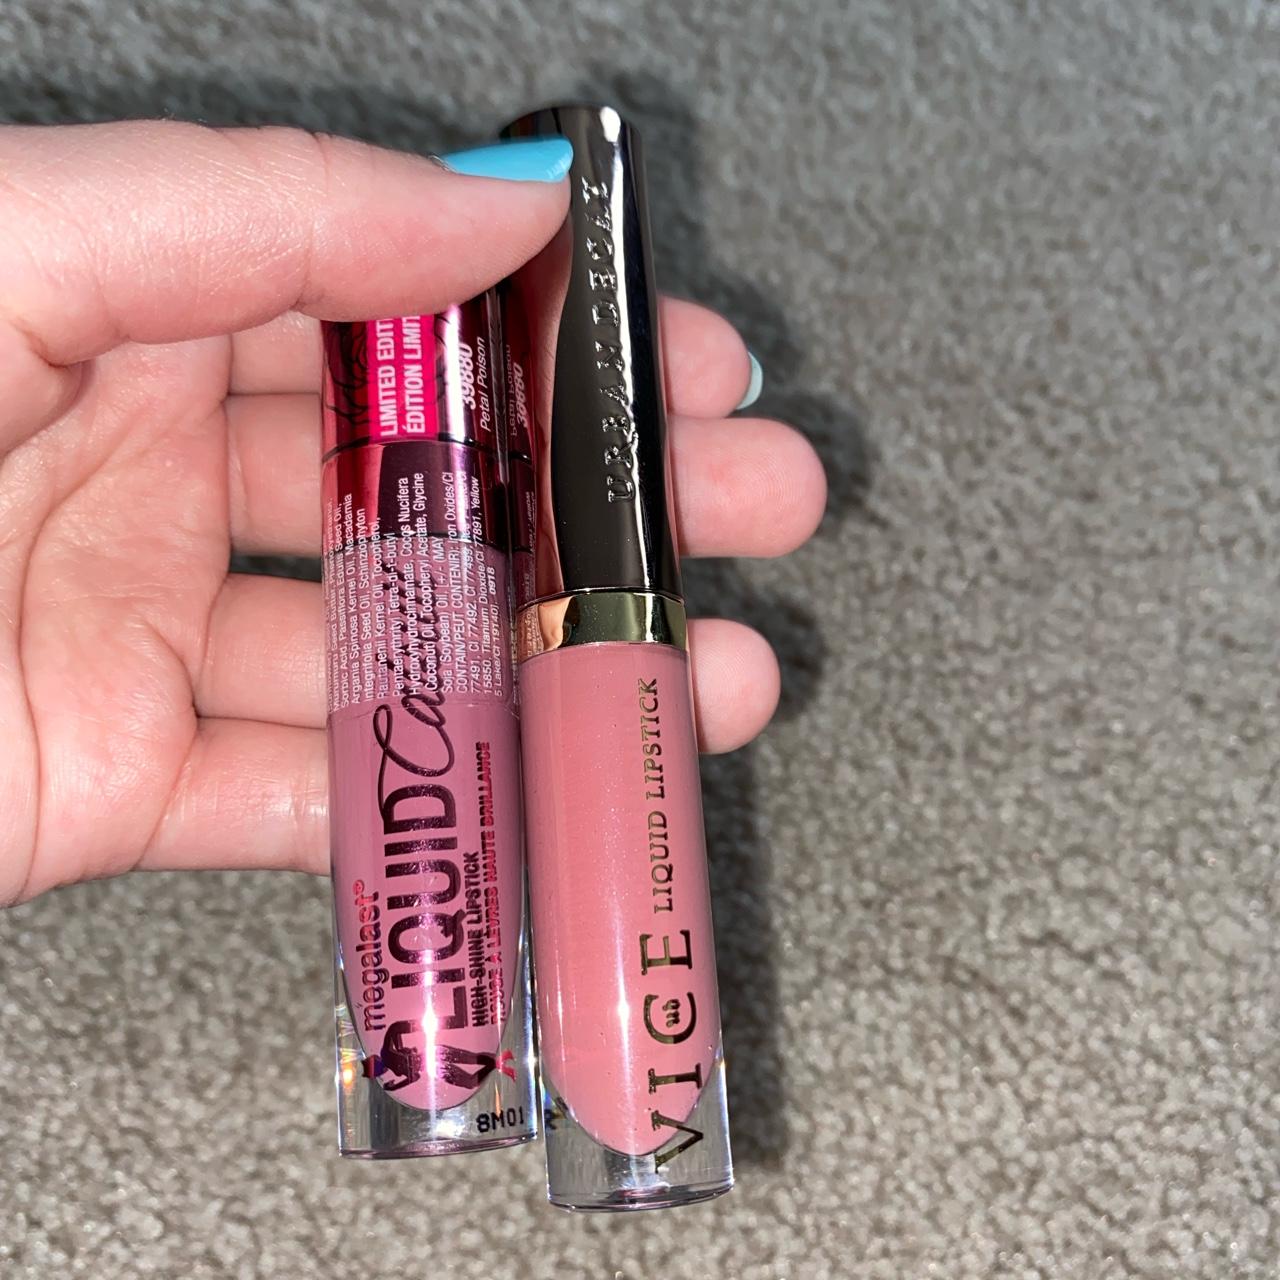 Product Image 1 - lip color duo
BRAND NEW NEVER